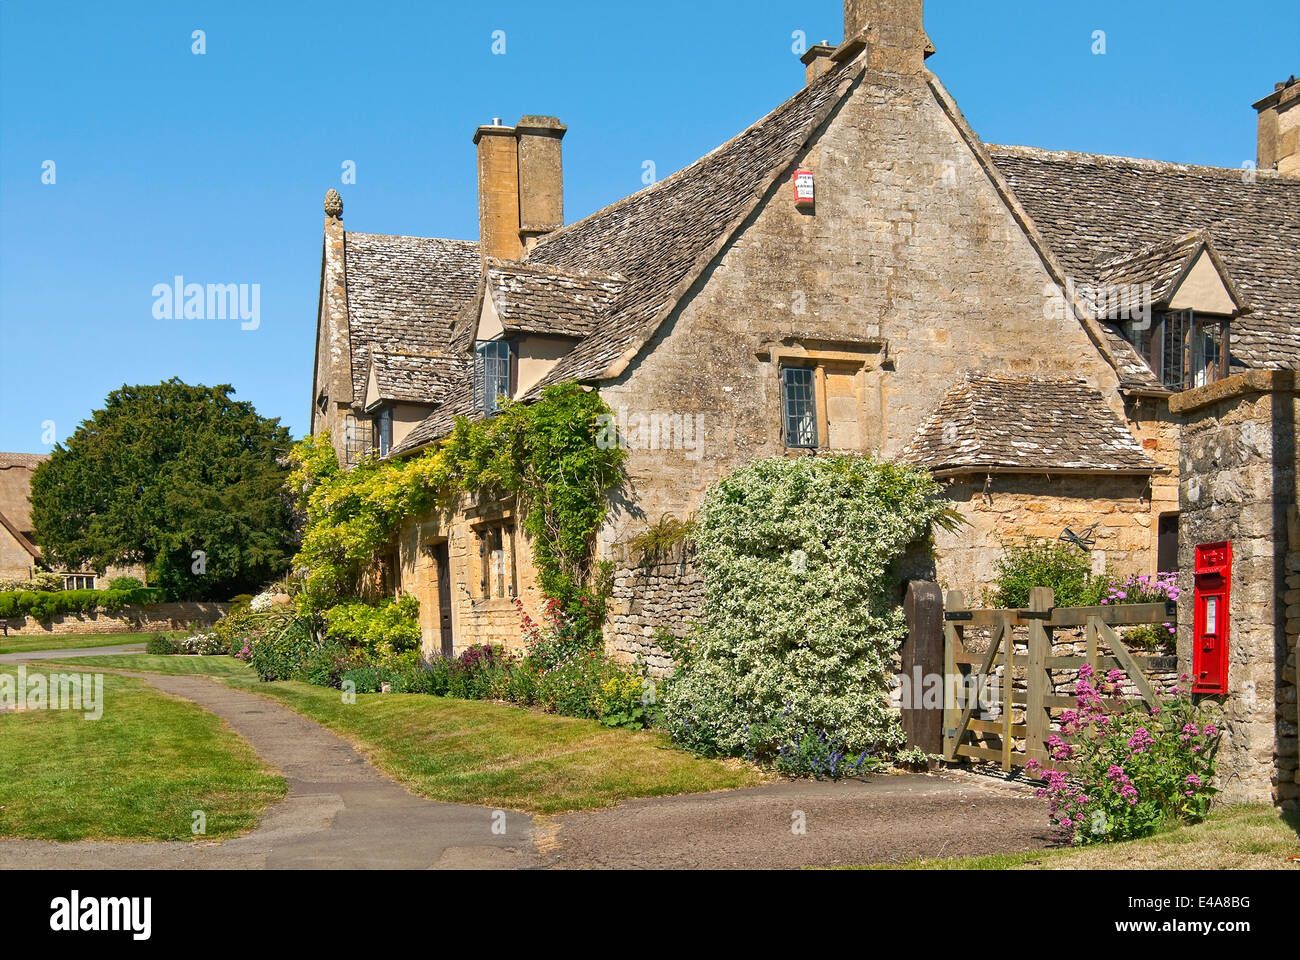 Typical Cotsworld House in Chipping Campden. Chipping Campden is a small market town within the Cotswold district of Gloucesters Stock Photo